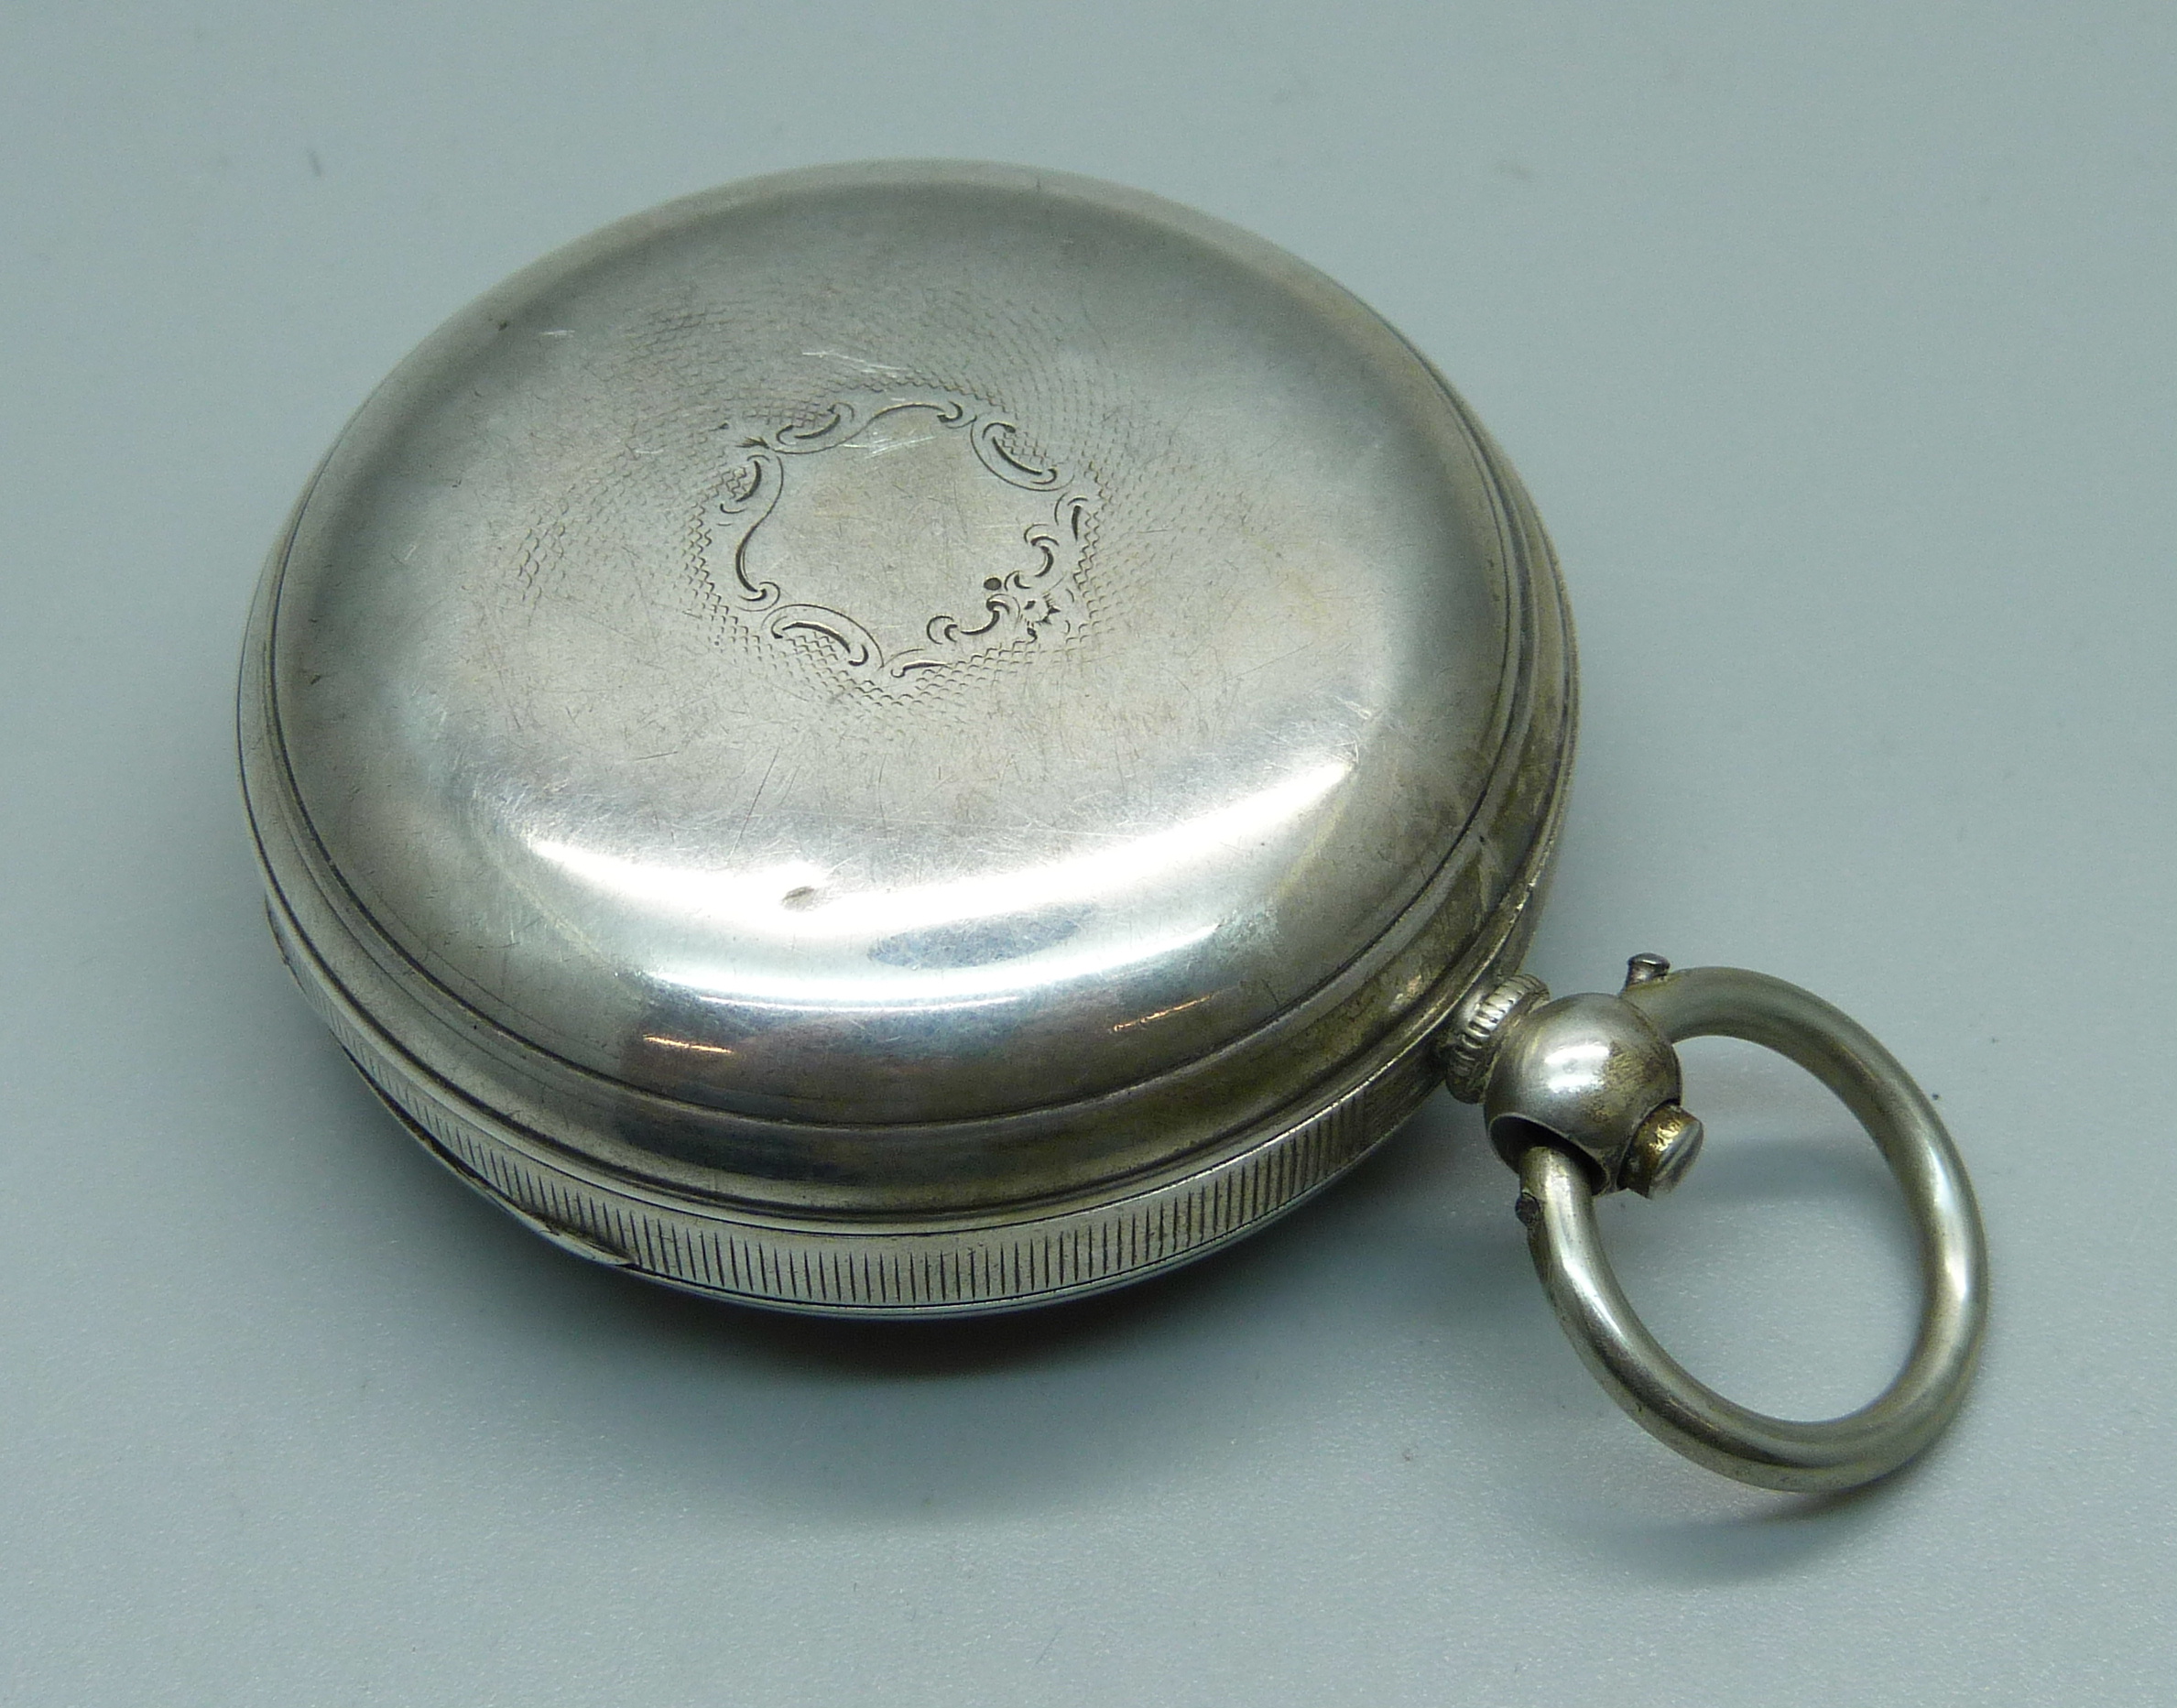 A silver pocket watch with verge fusee movement - Image 2 of 4